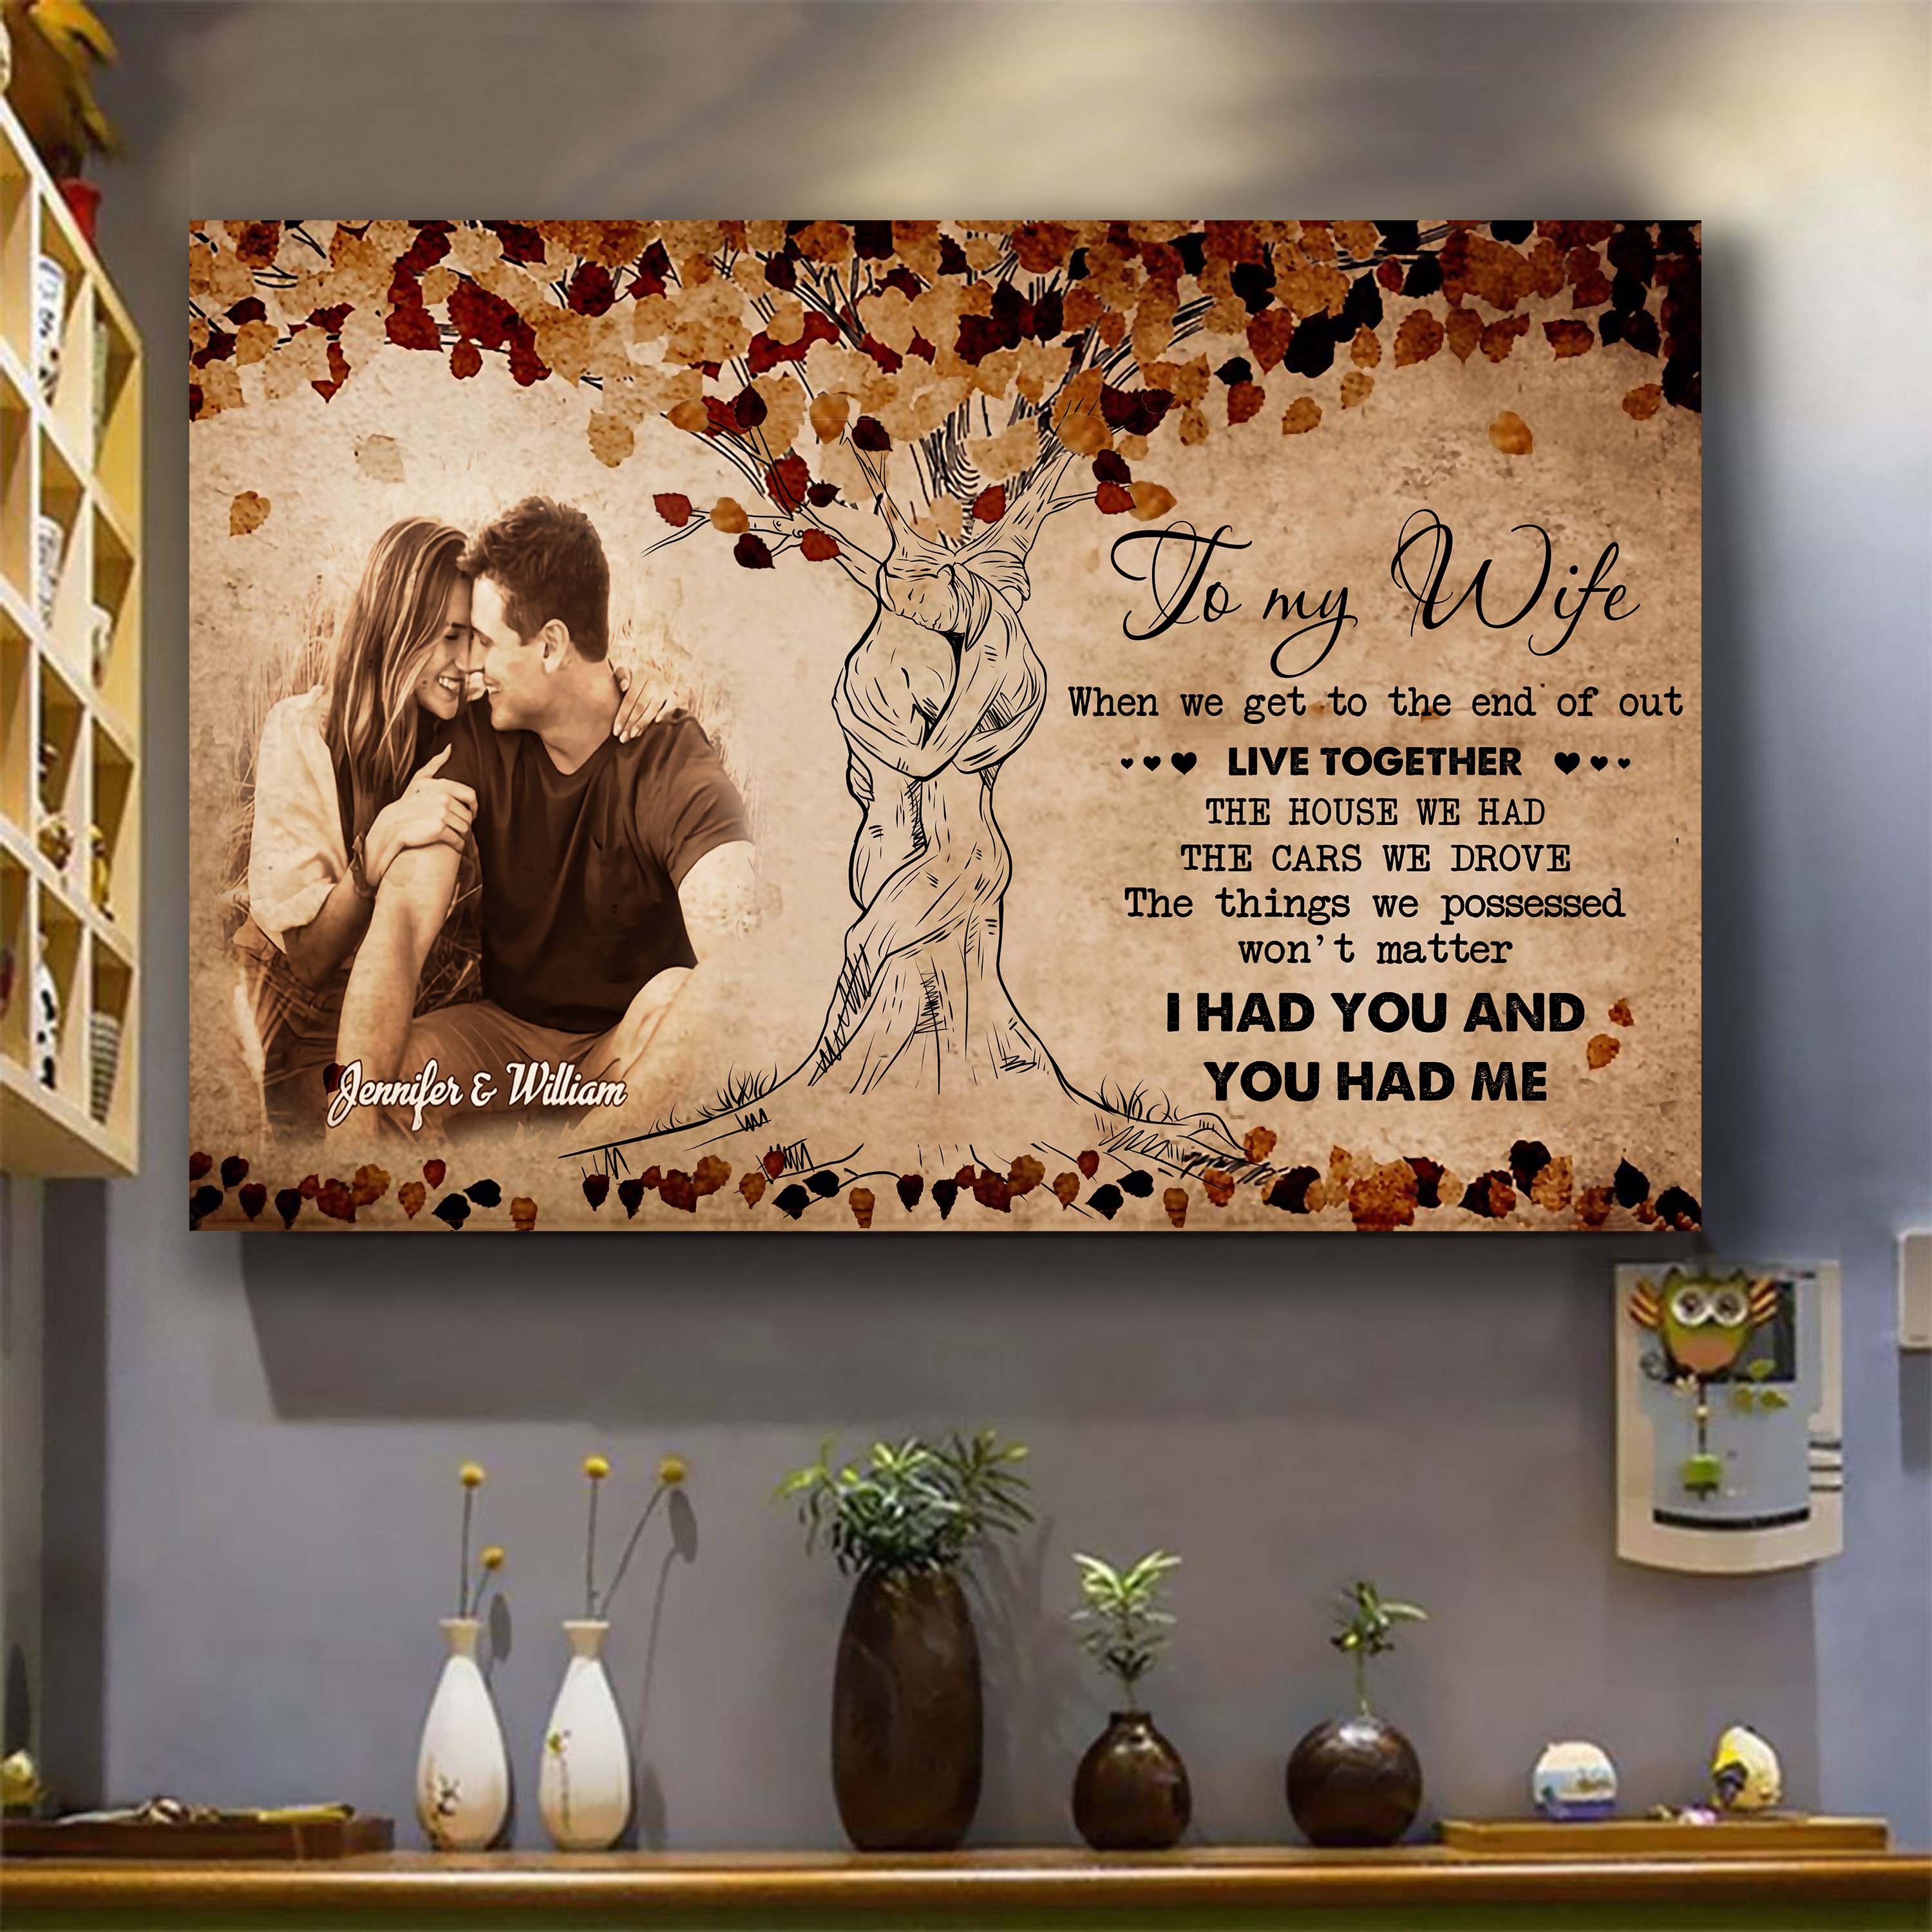 Valentines gifts-Poster canvas-Custom Image- Husband to Wife- You are braver than you believe